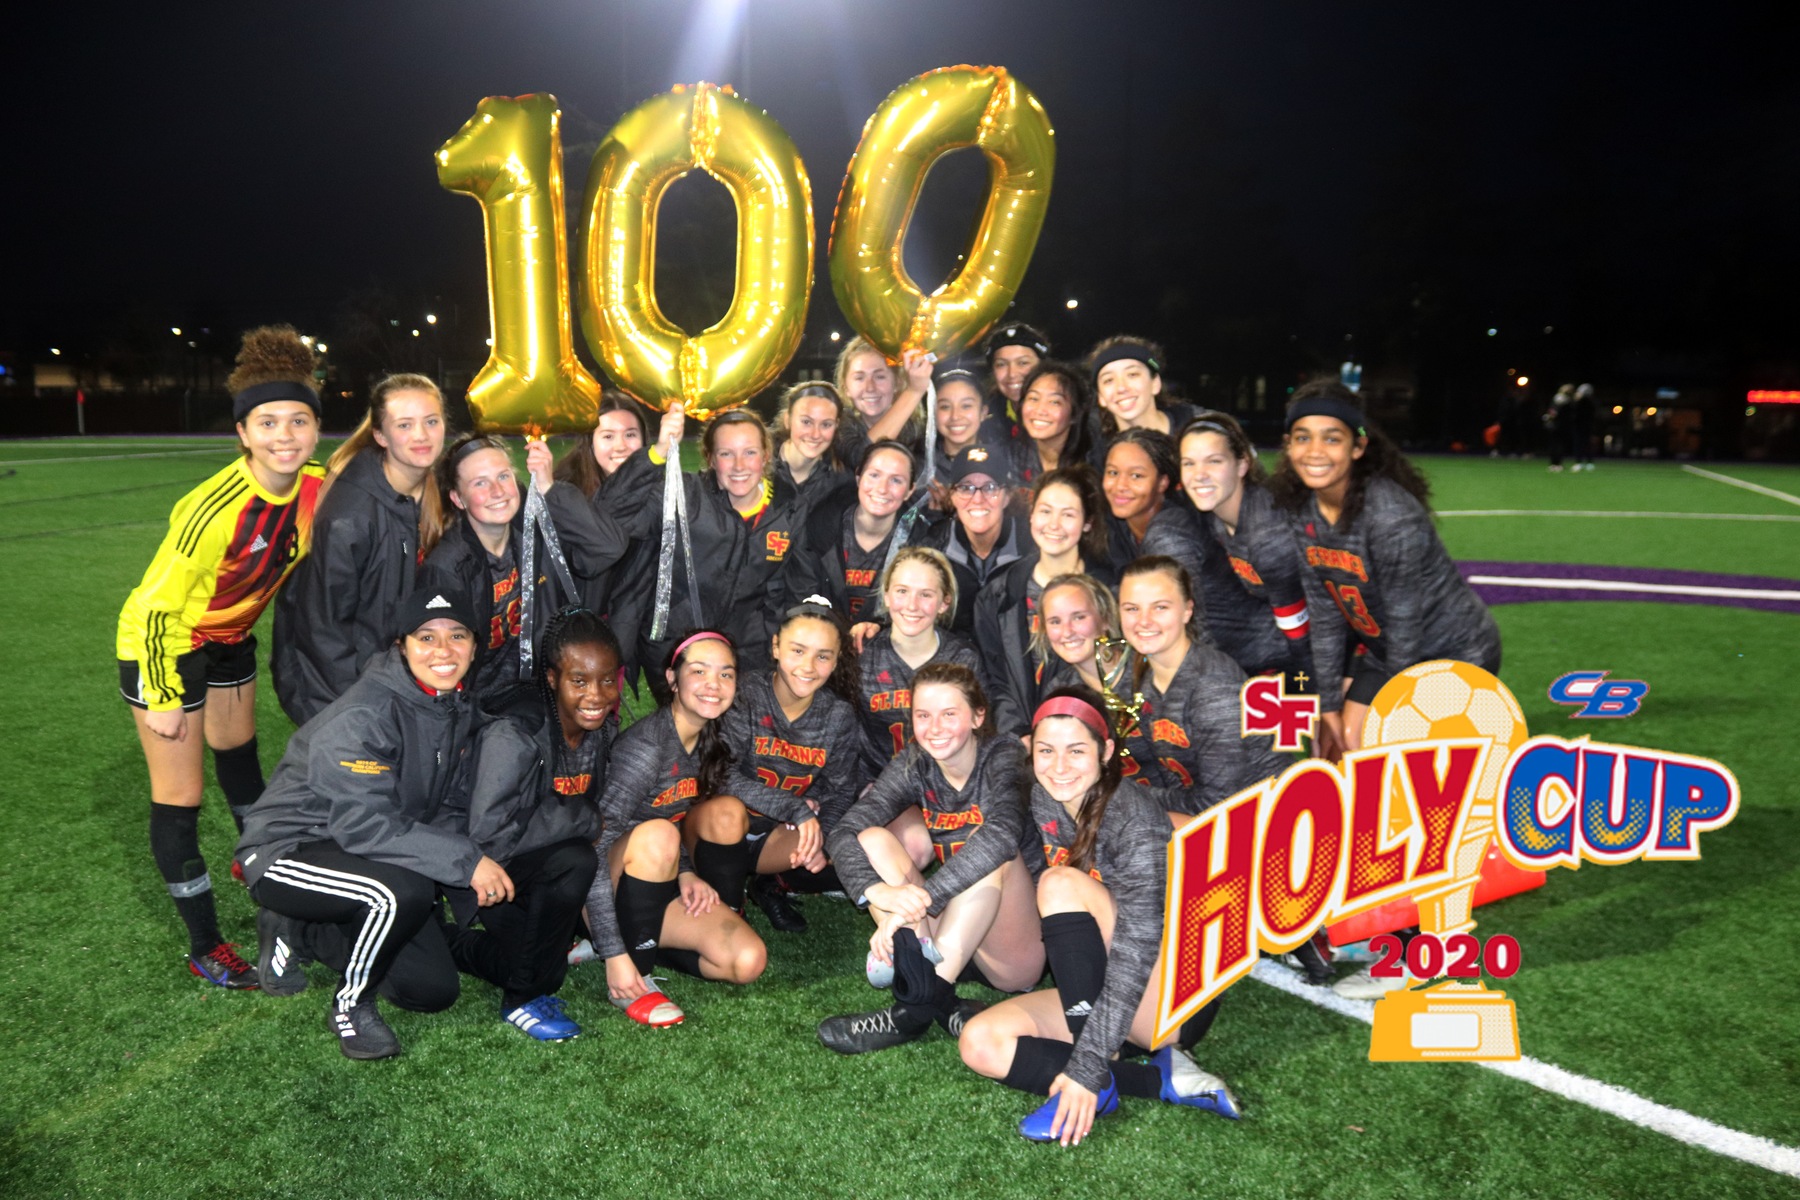 Soccer Comes Back for 3-1 Holy Cup Win, Robinson Records 100th Win